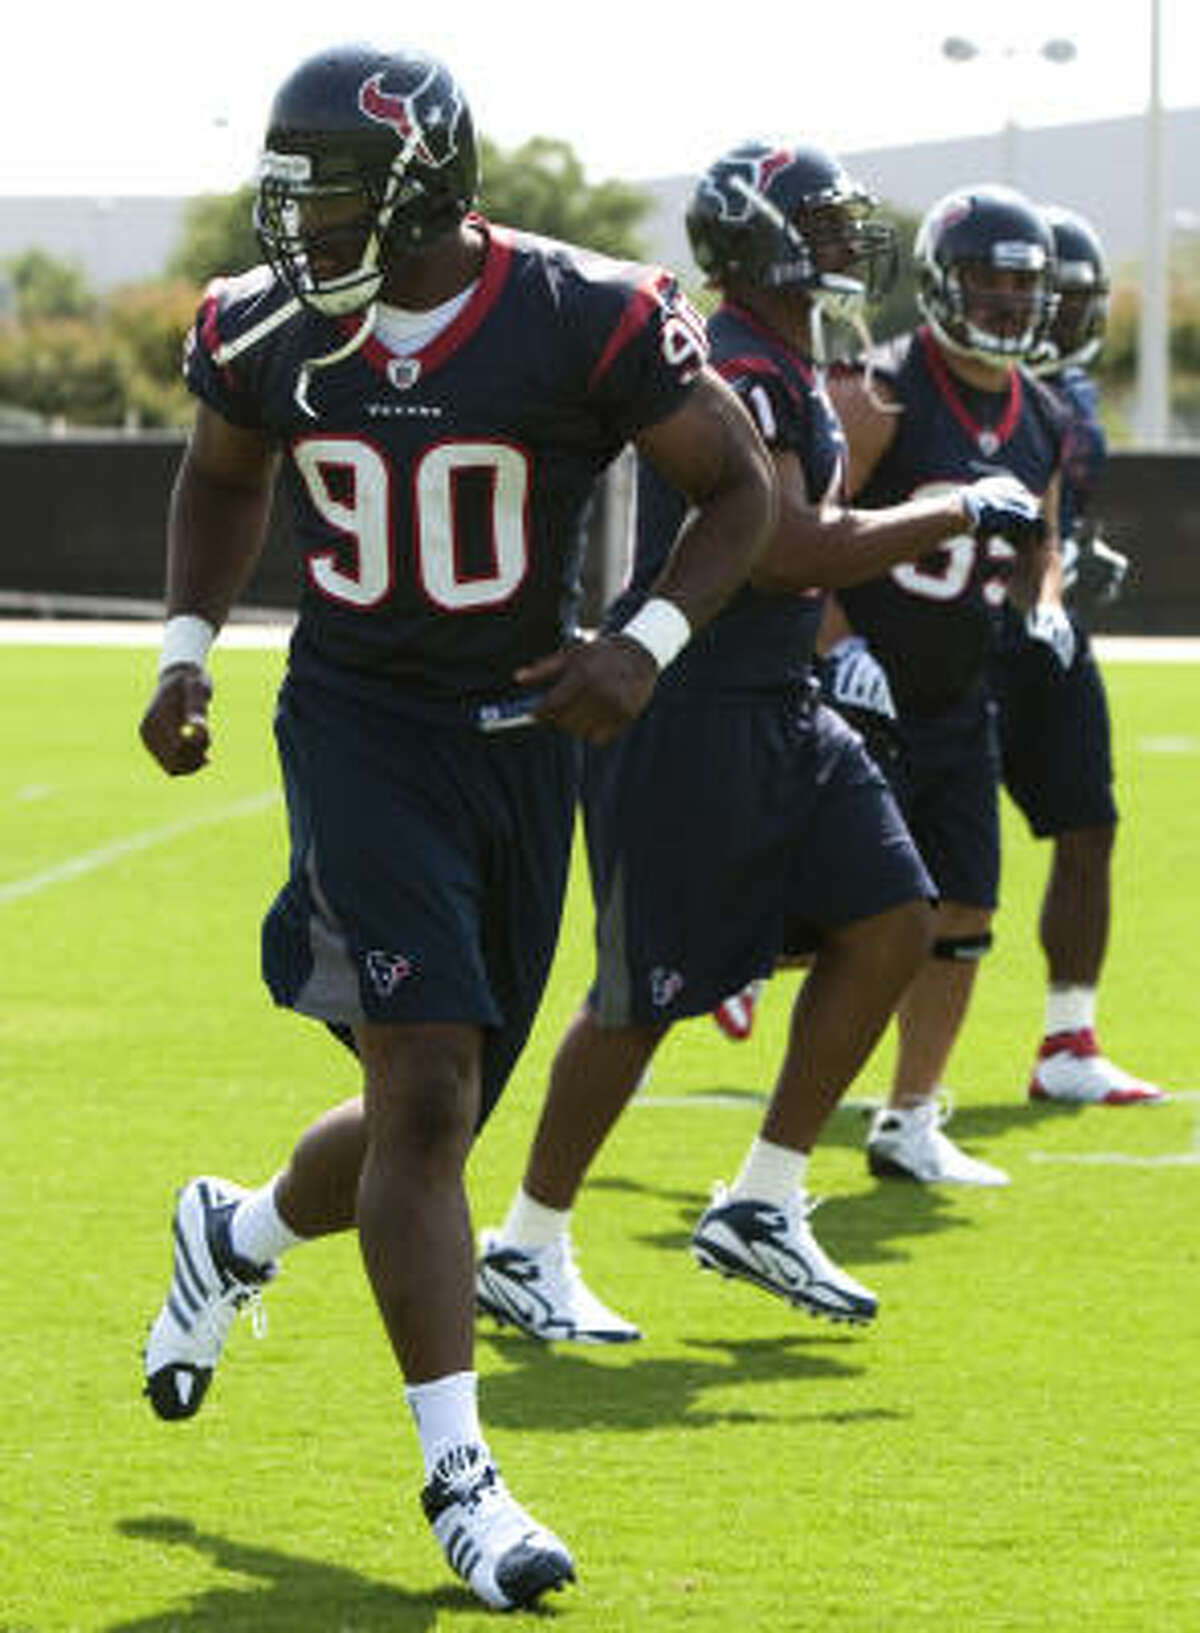 Mario Williams, above, and the Texans' three other starting defensive linemen lost a combined 59 pounds during the offseason.